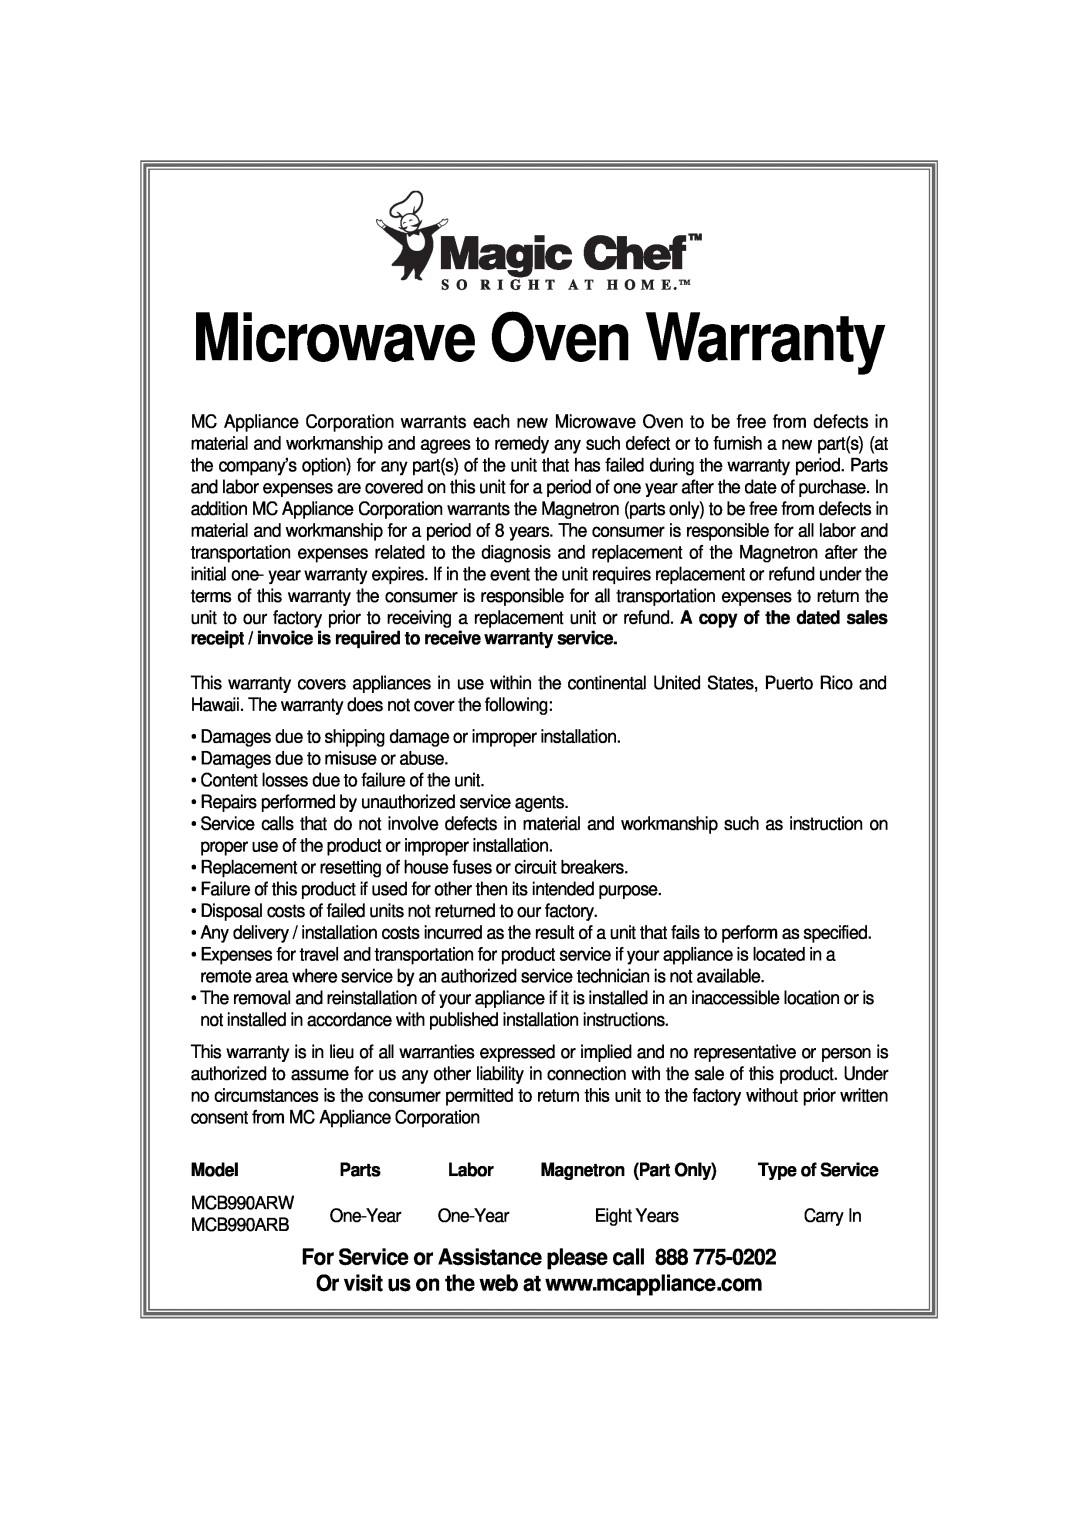 Magic Chef MCD990ARW, MCD990ARB instruction manual Microwave Oven Warranty, Model, Parts, Labor, Magnetron Part Only 